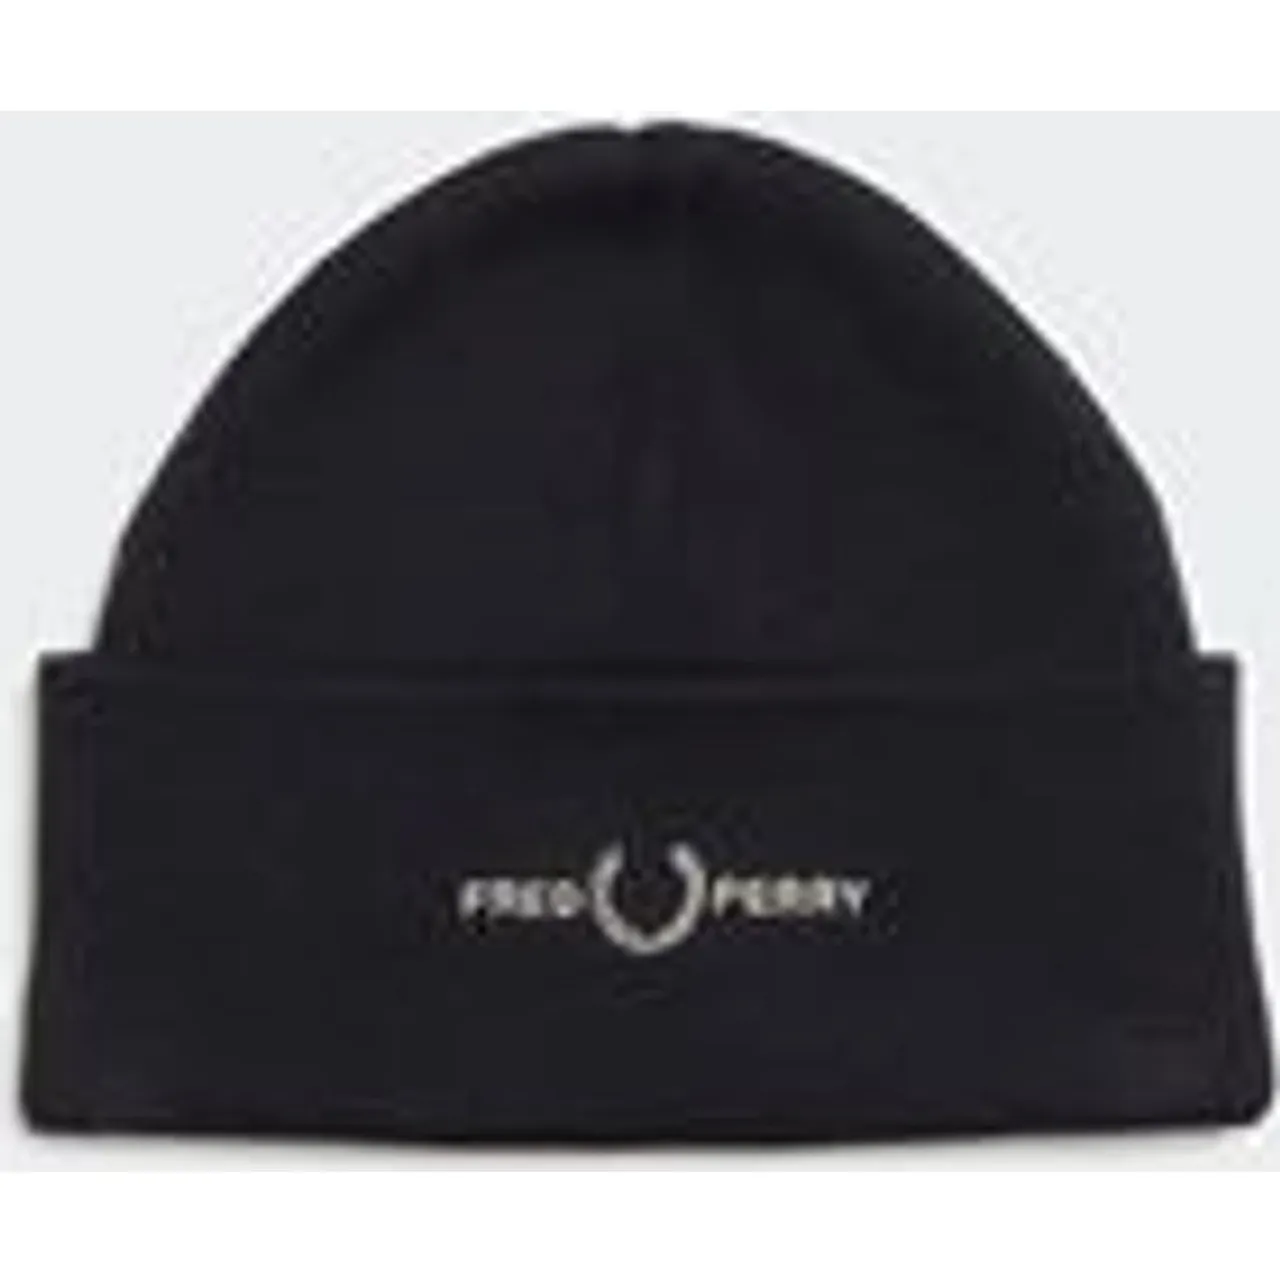 Fred Perry Unisex Graphic Beanie in Black